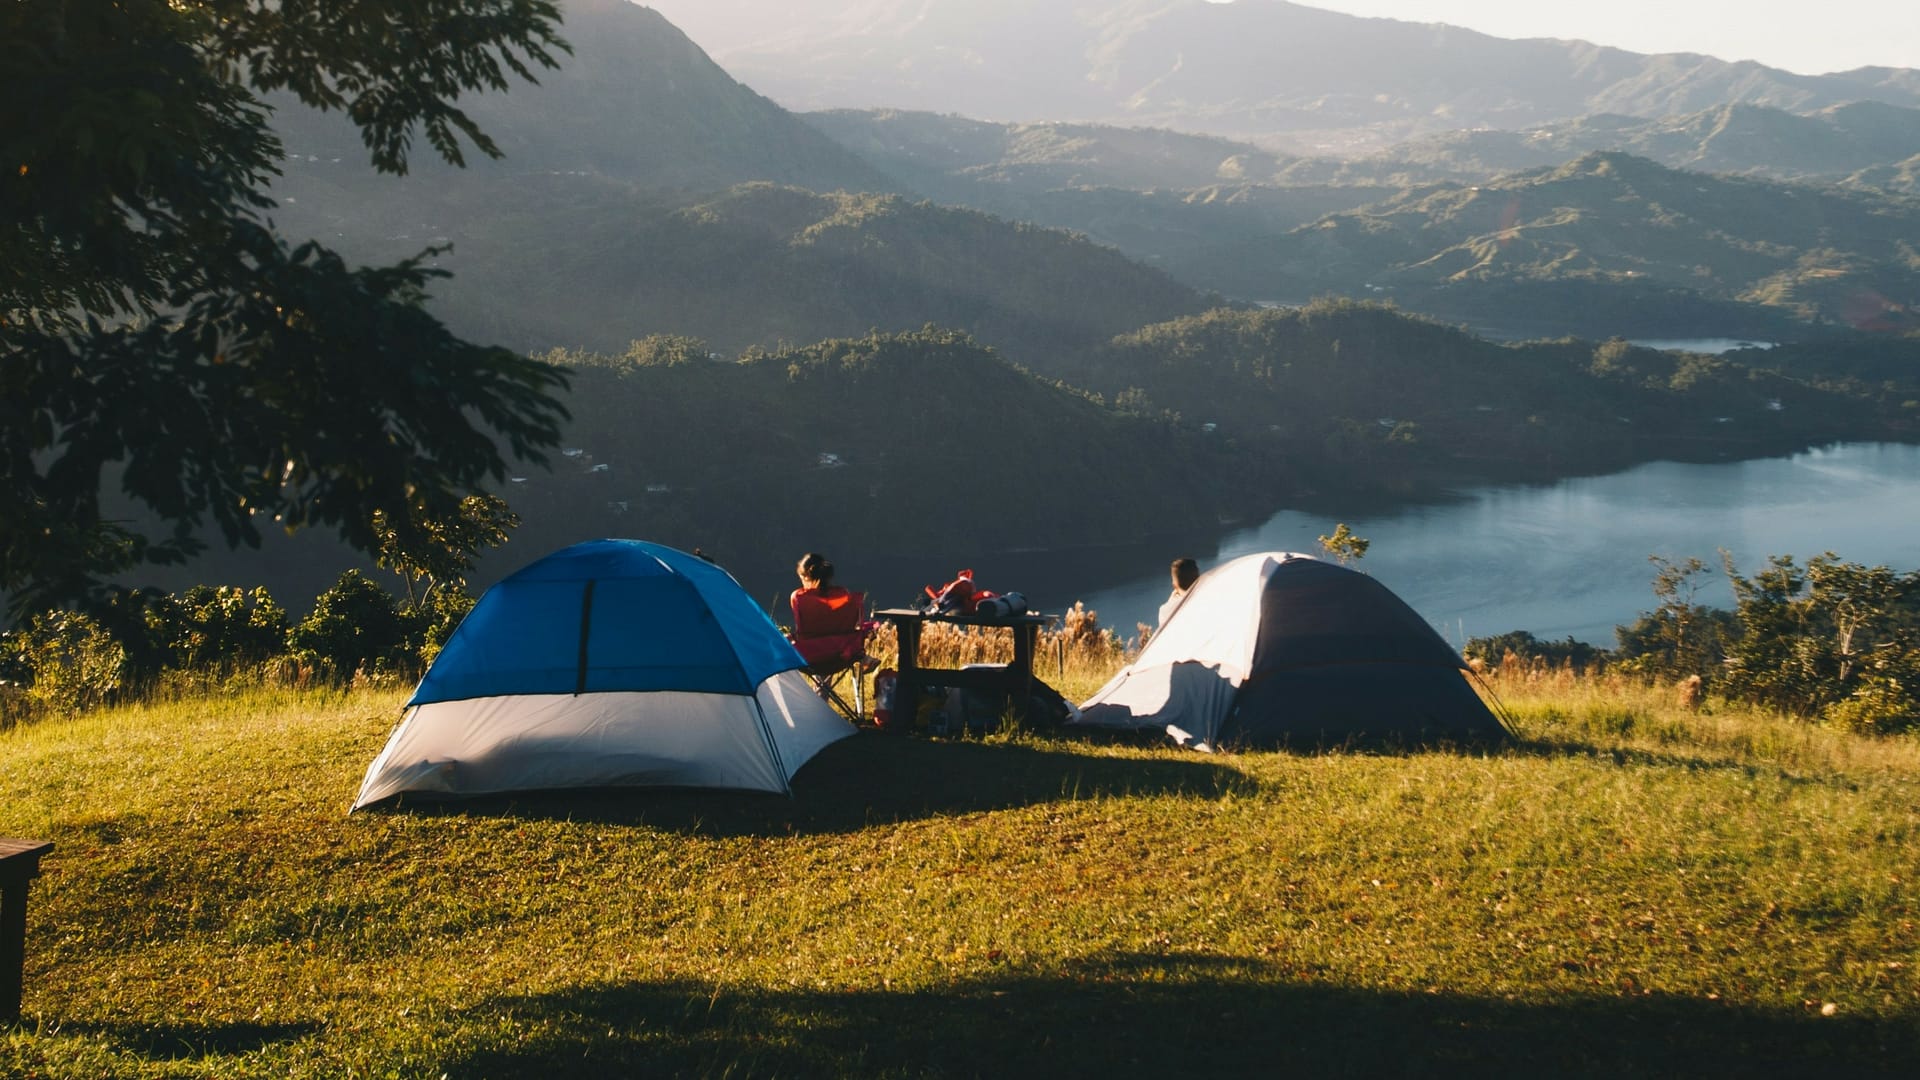 Two people and two small tents camping etiquette on top of a green hill overlooking a huge wide open landscape below. Photo by Victor Larracuente